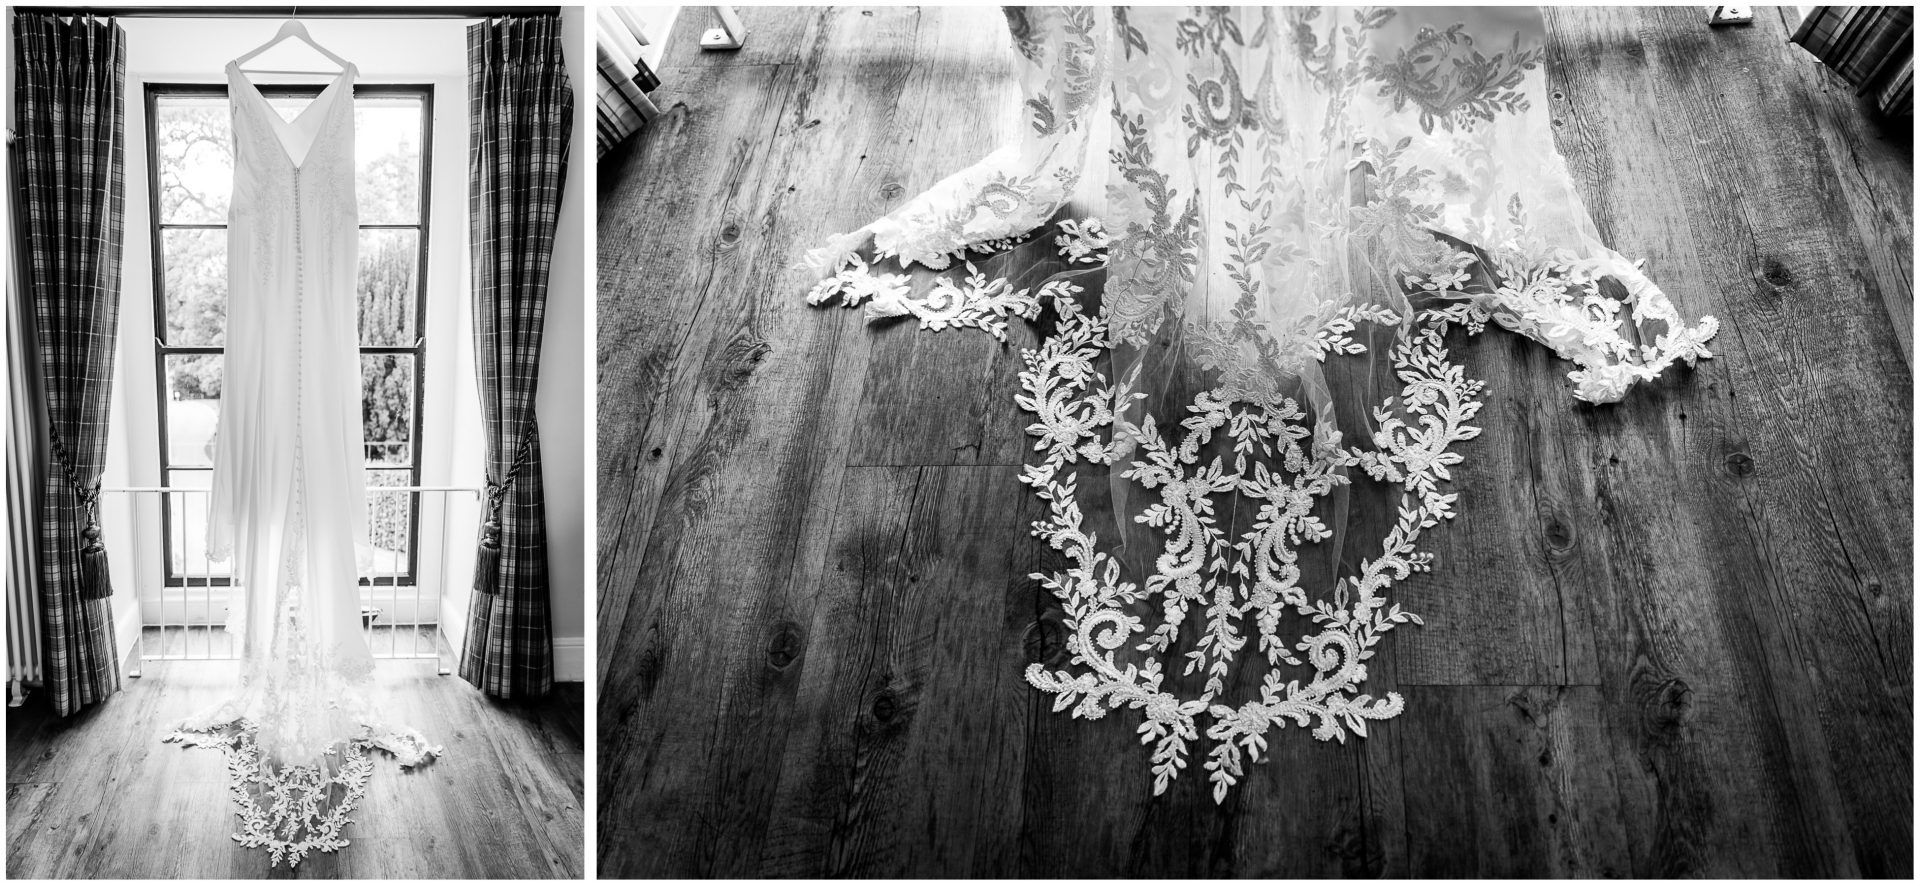 Bride wedding dress in black and white with detailing on train